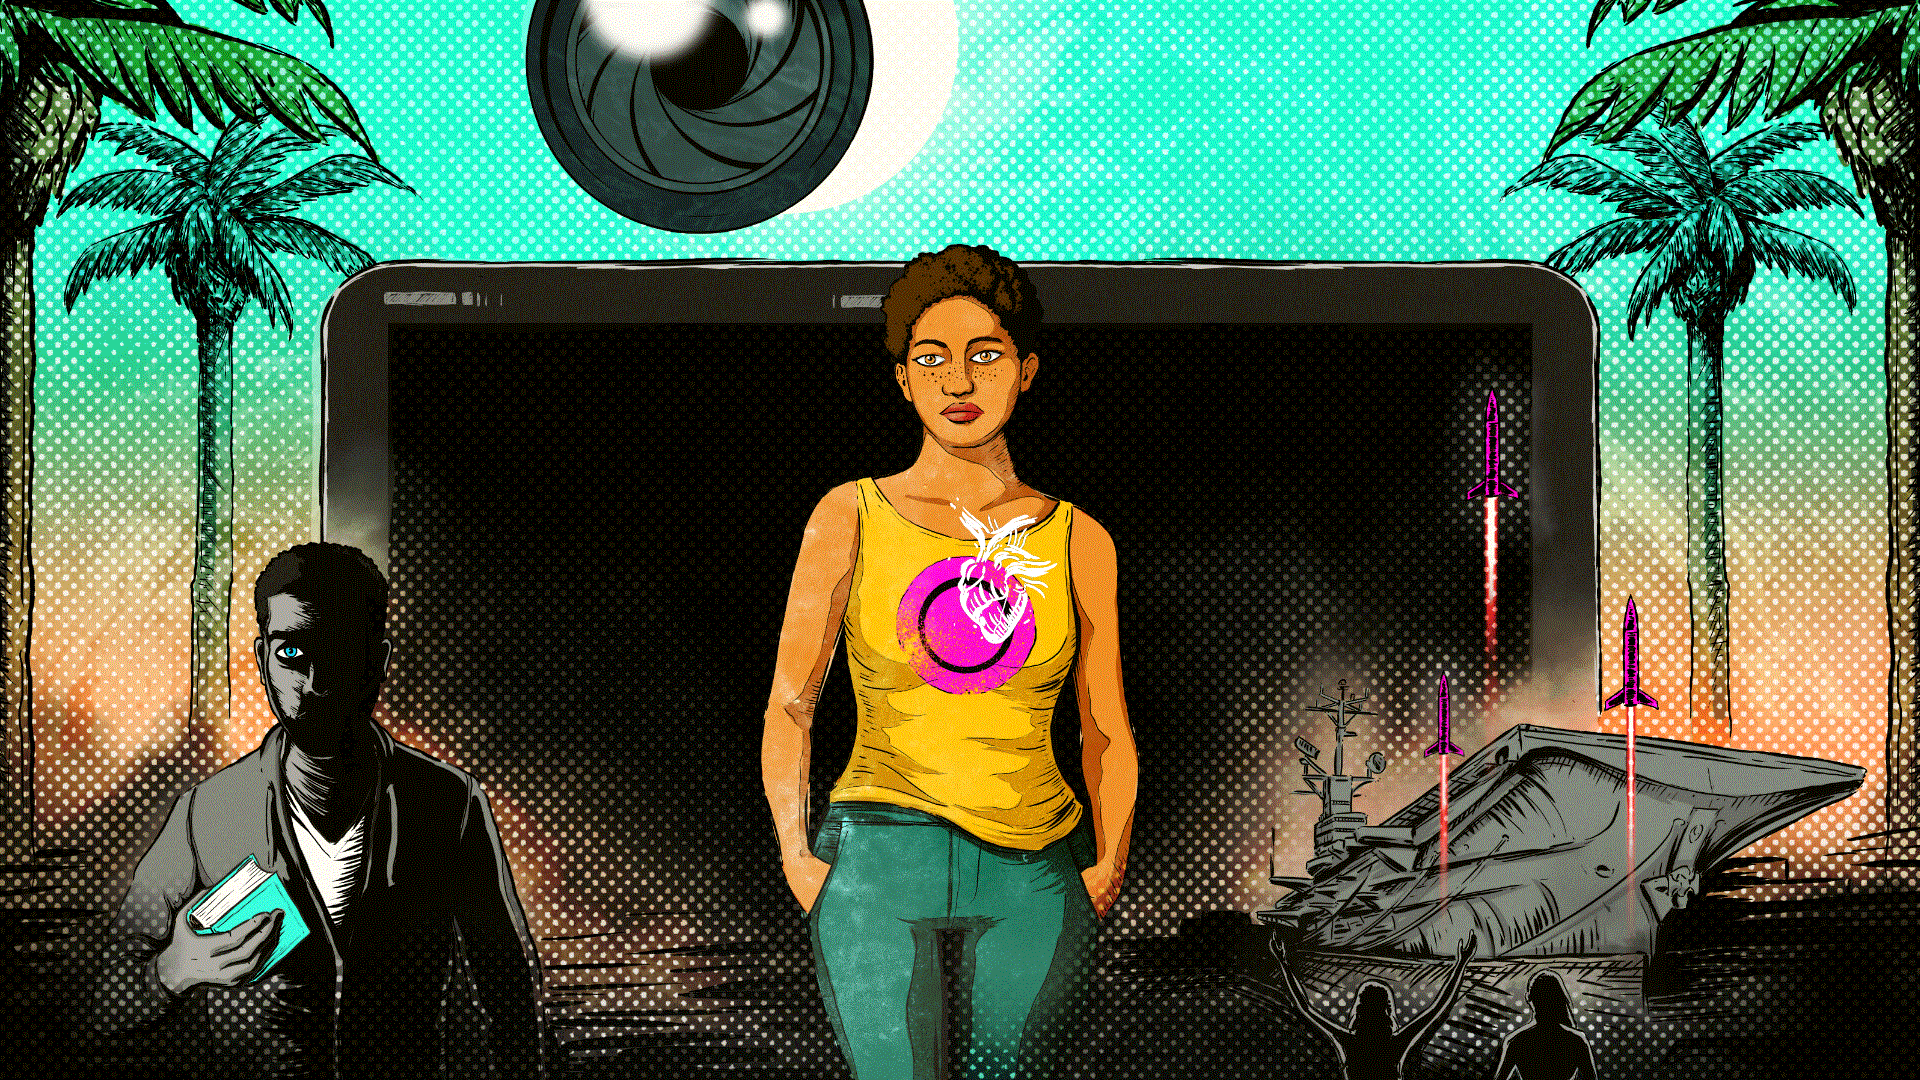 A woman with a short afro strides toward the viewer. An animation of a beating heart is superimposed on top of her figure. A cursor blinks in time with the heart.